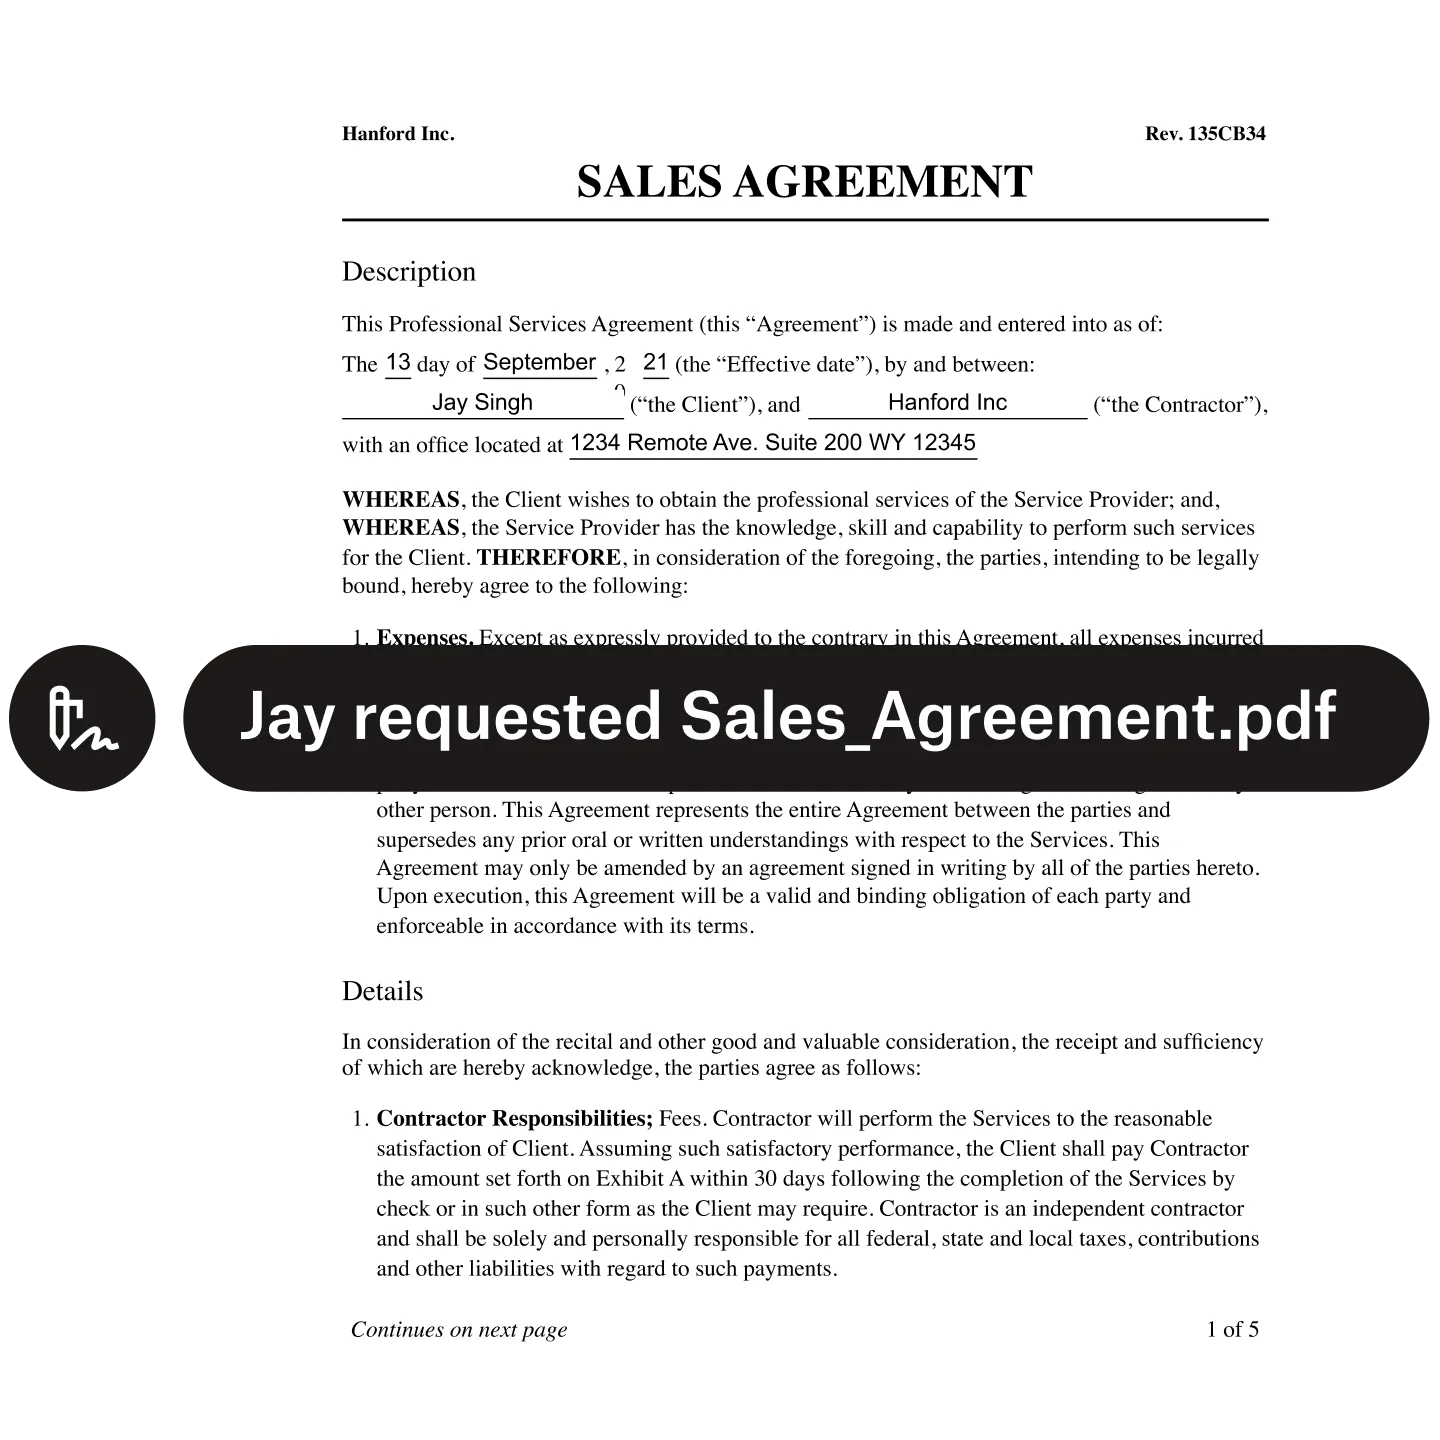 A product visual showing the first page of a sales agreement with a label stating “Jay requested Sales_Agreement.pdf”